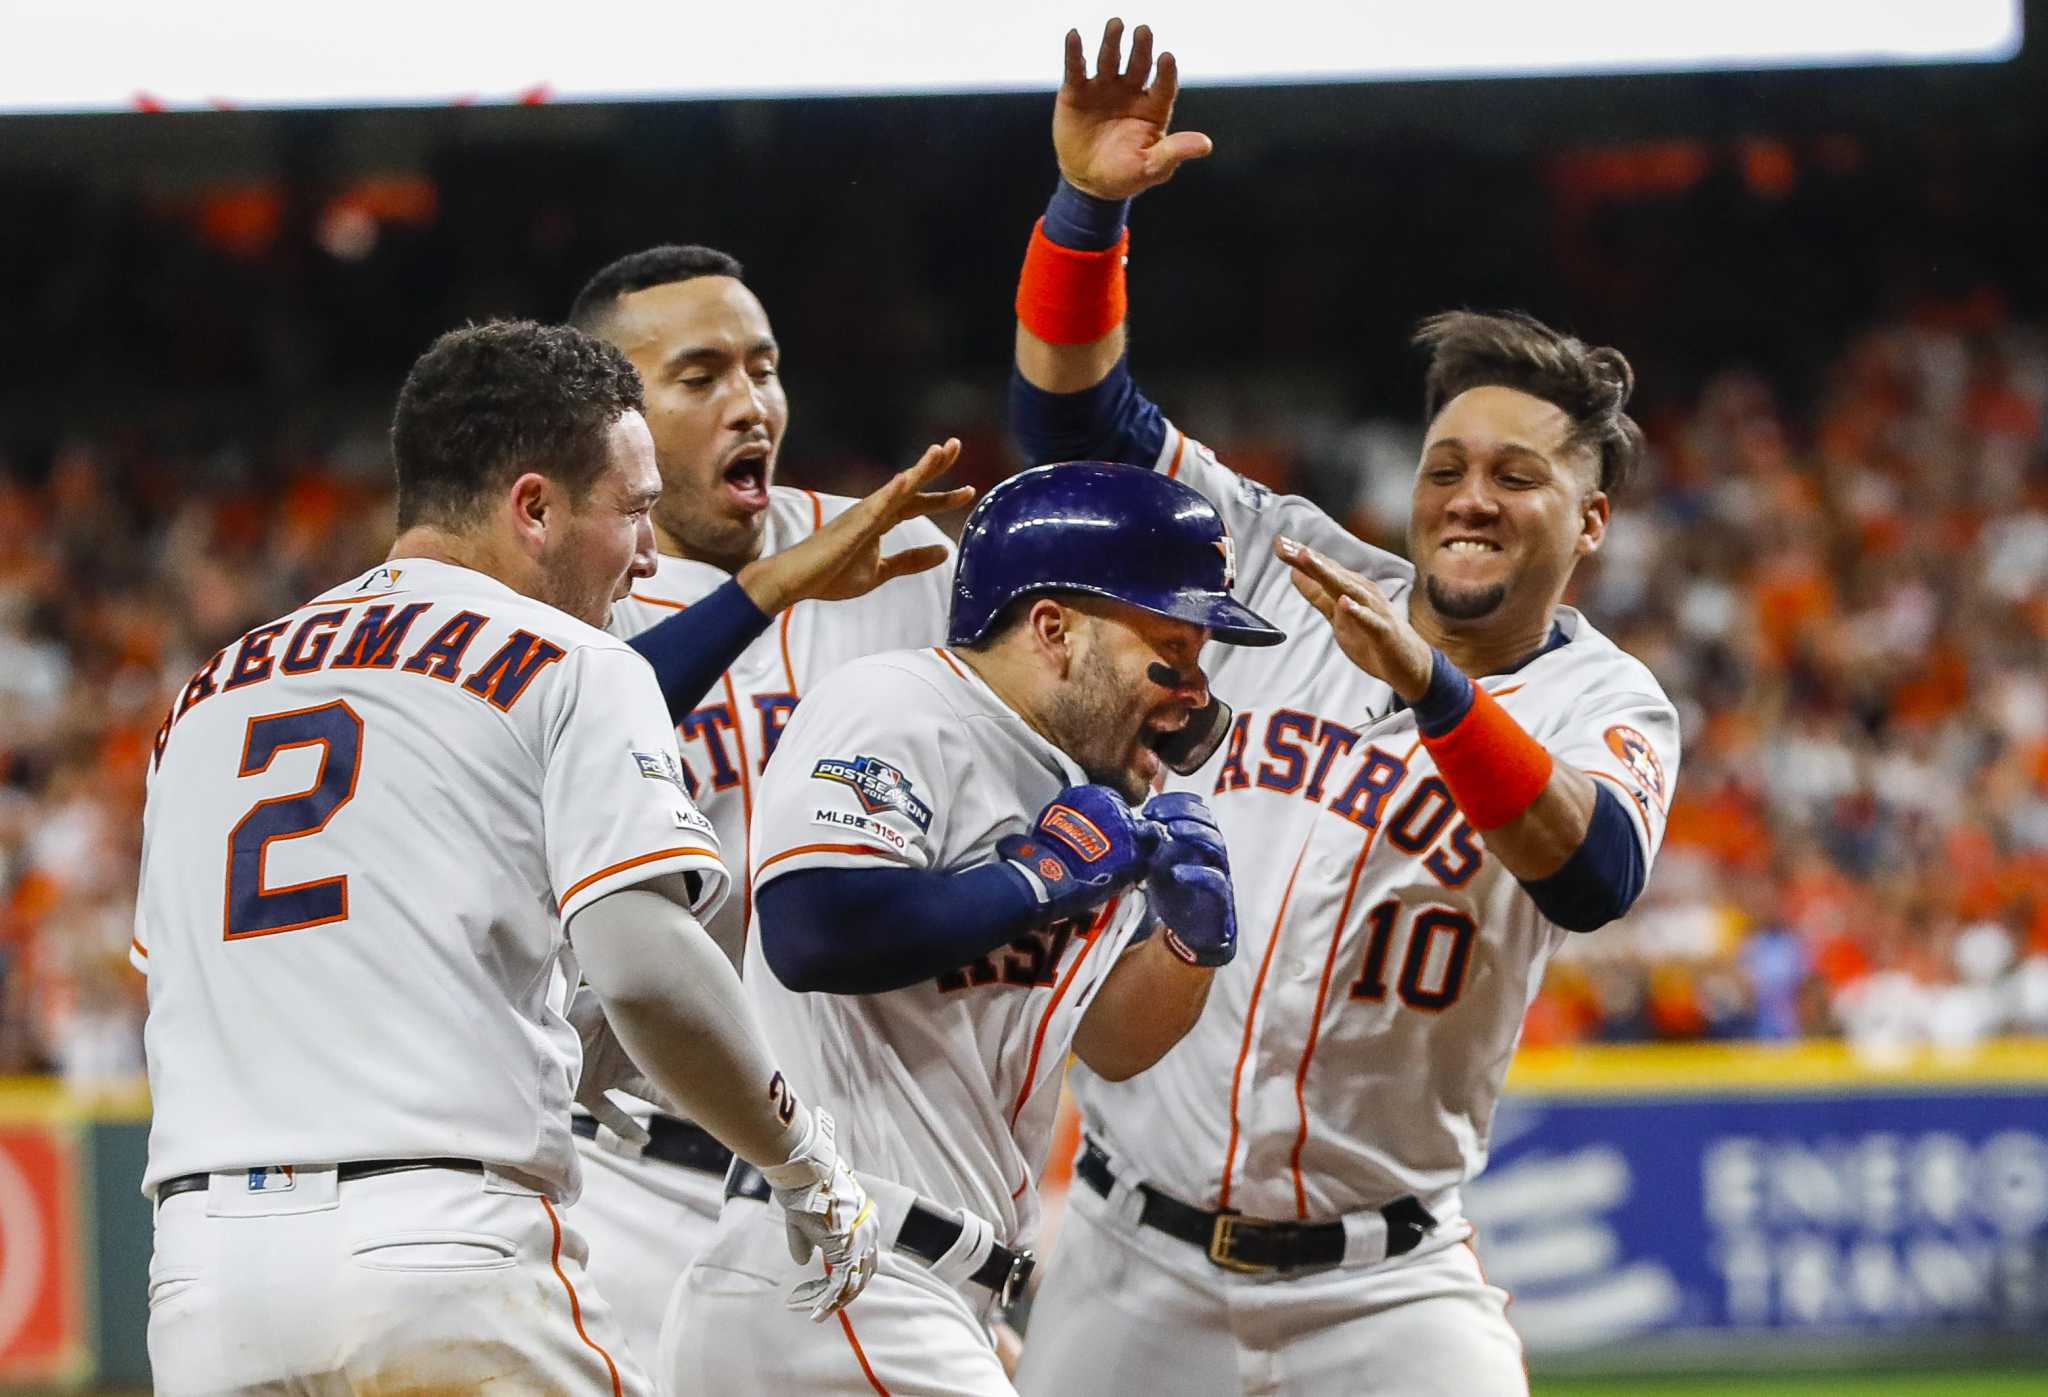 Washington Nationals top Astros to win first World Series title